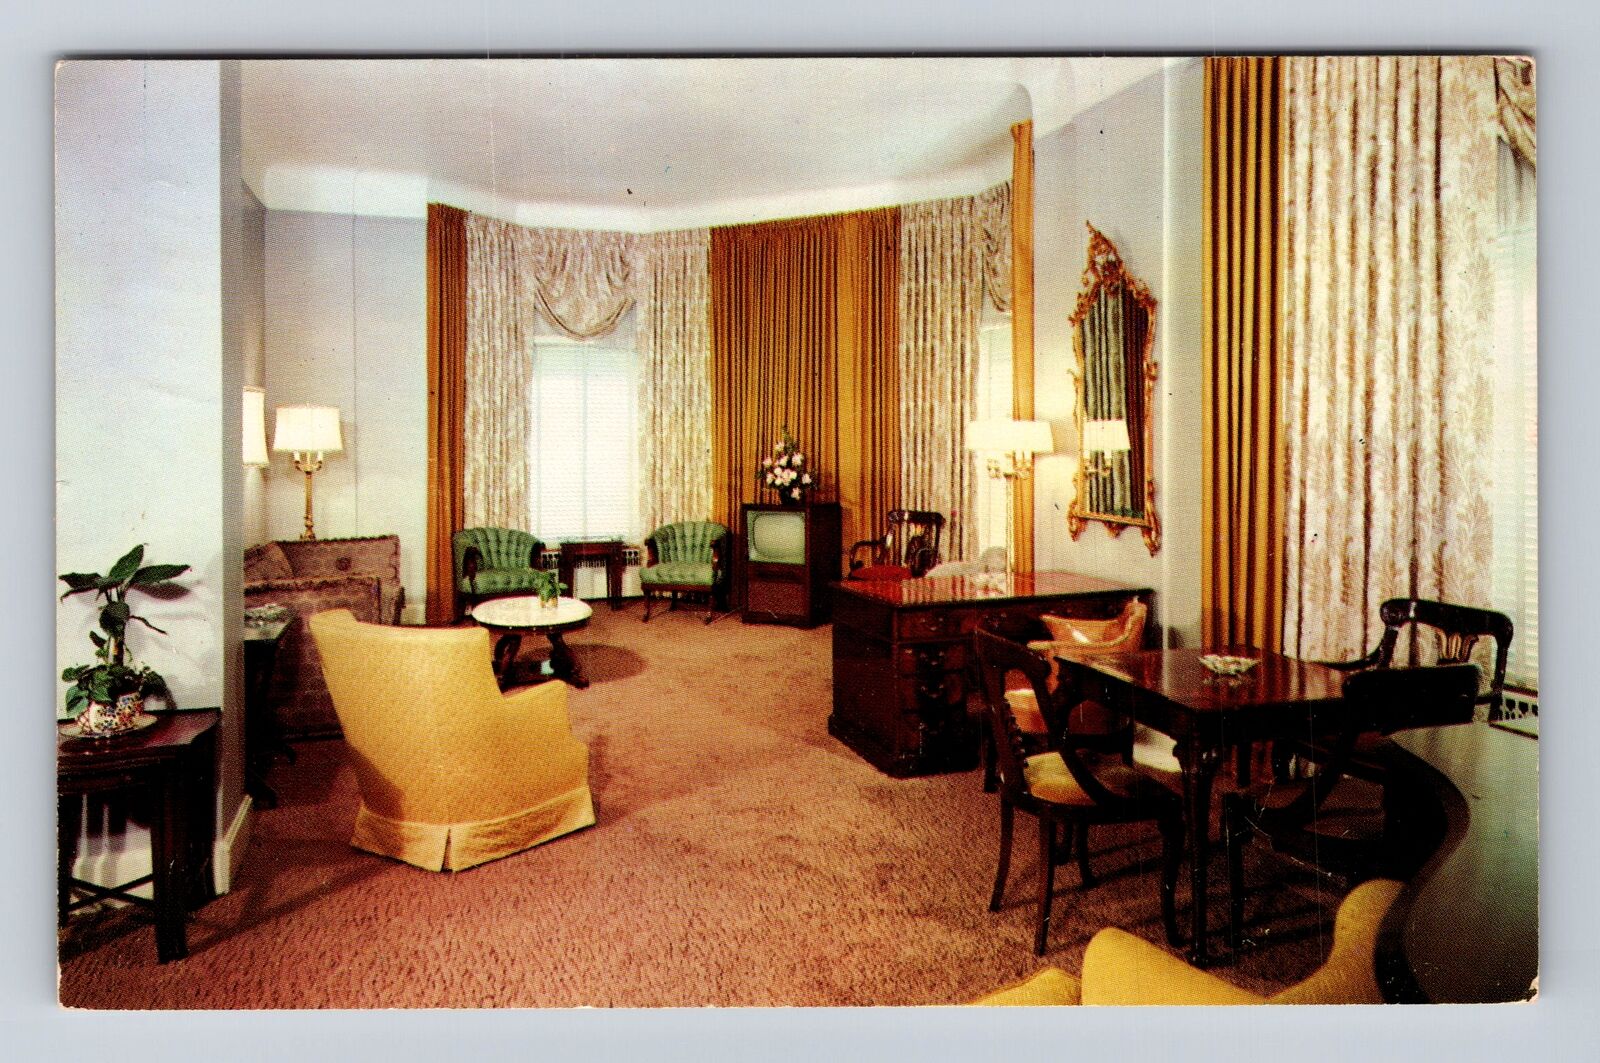 Chicago IL-Illinois, Living Room Of Presidential Suite, Vintage c1964 Postcard